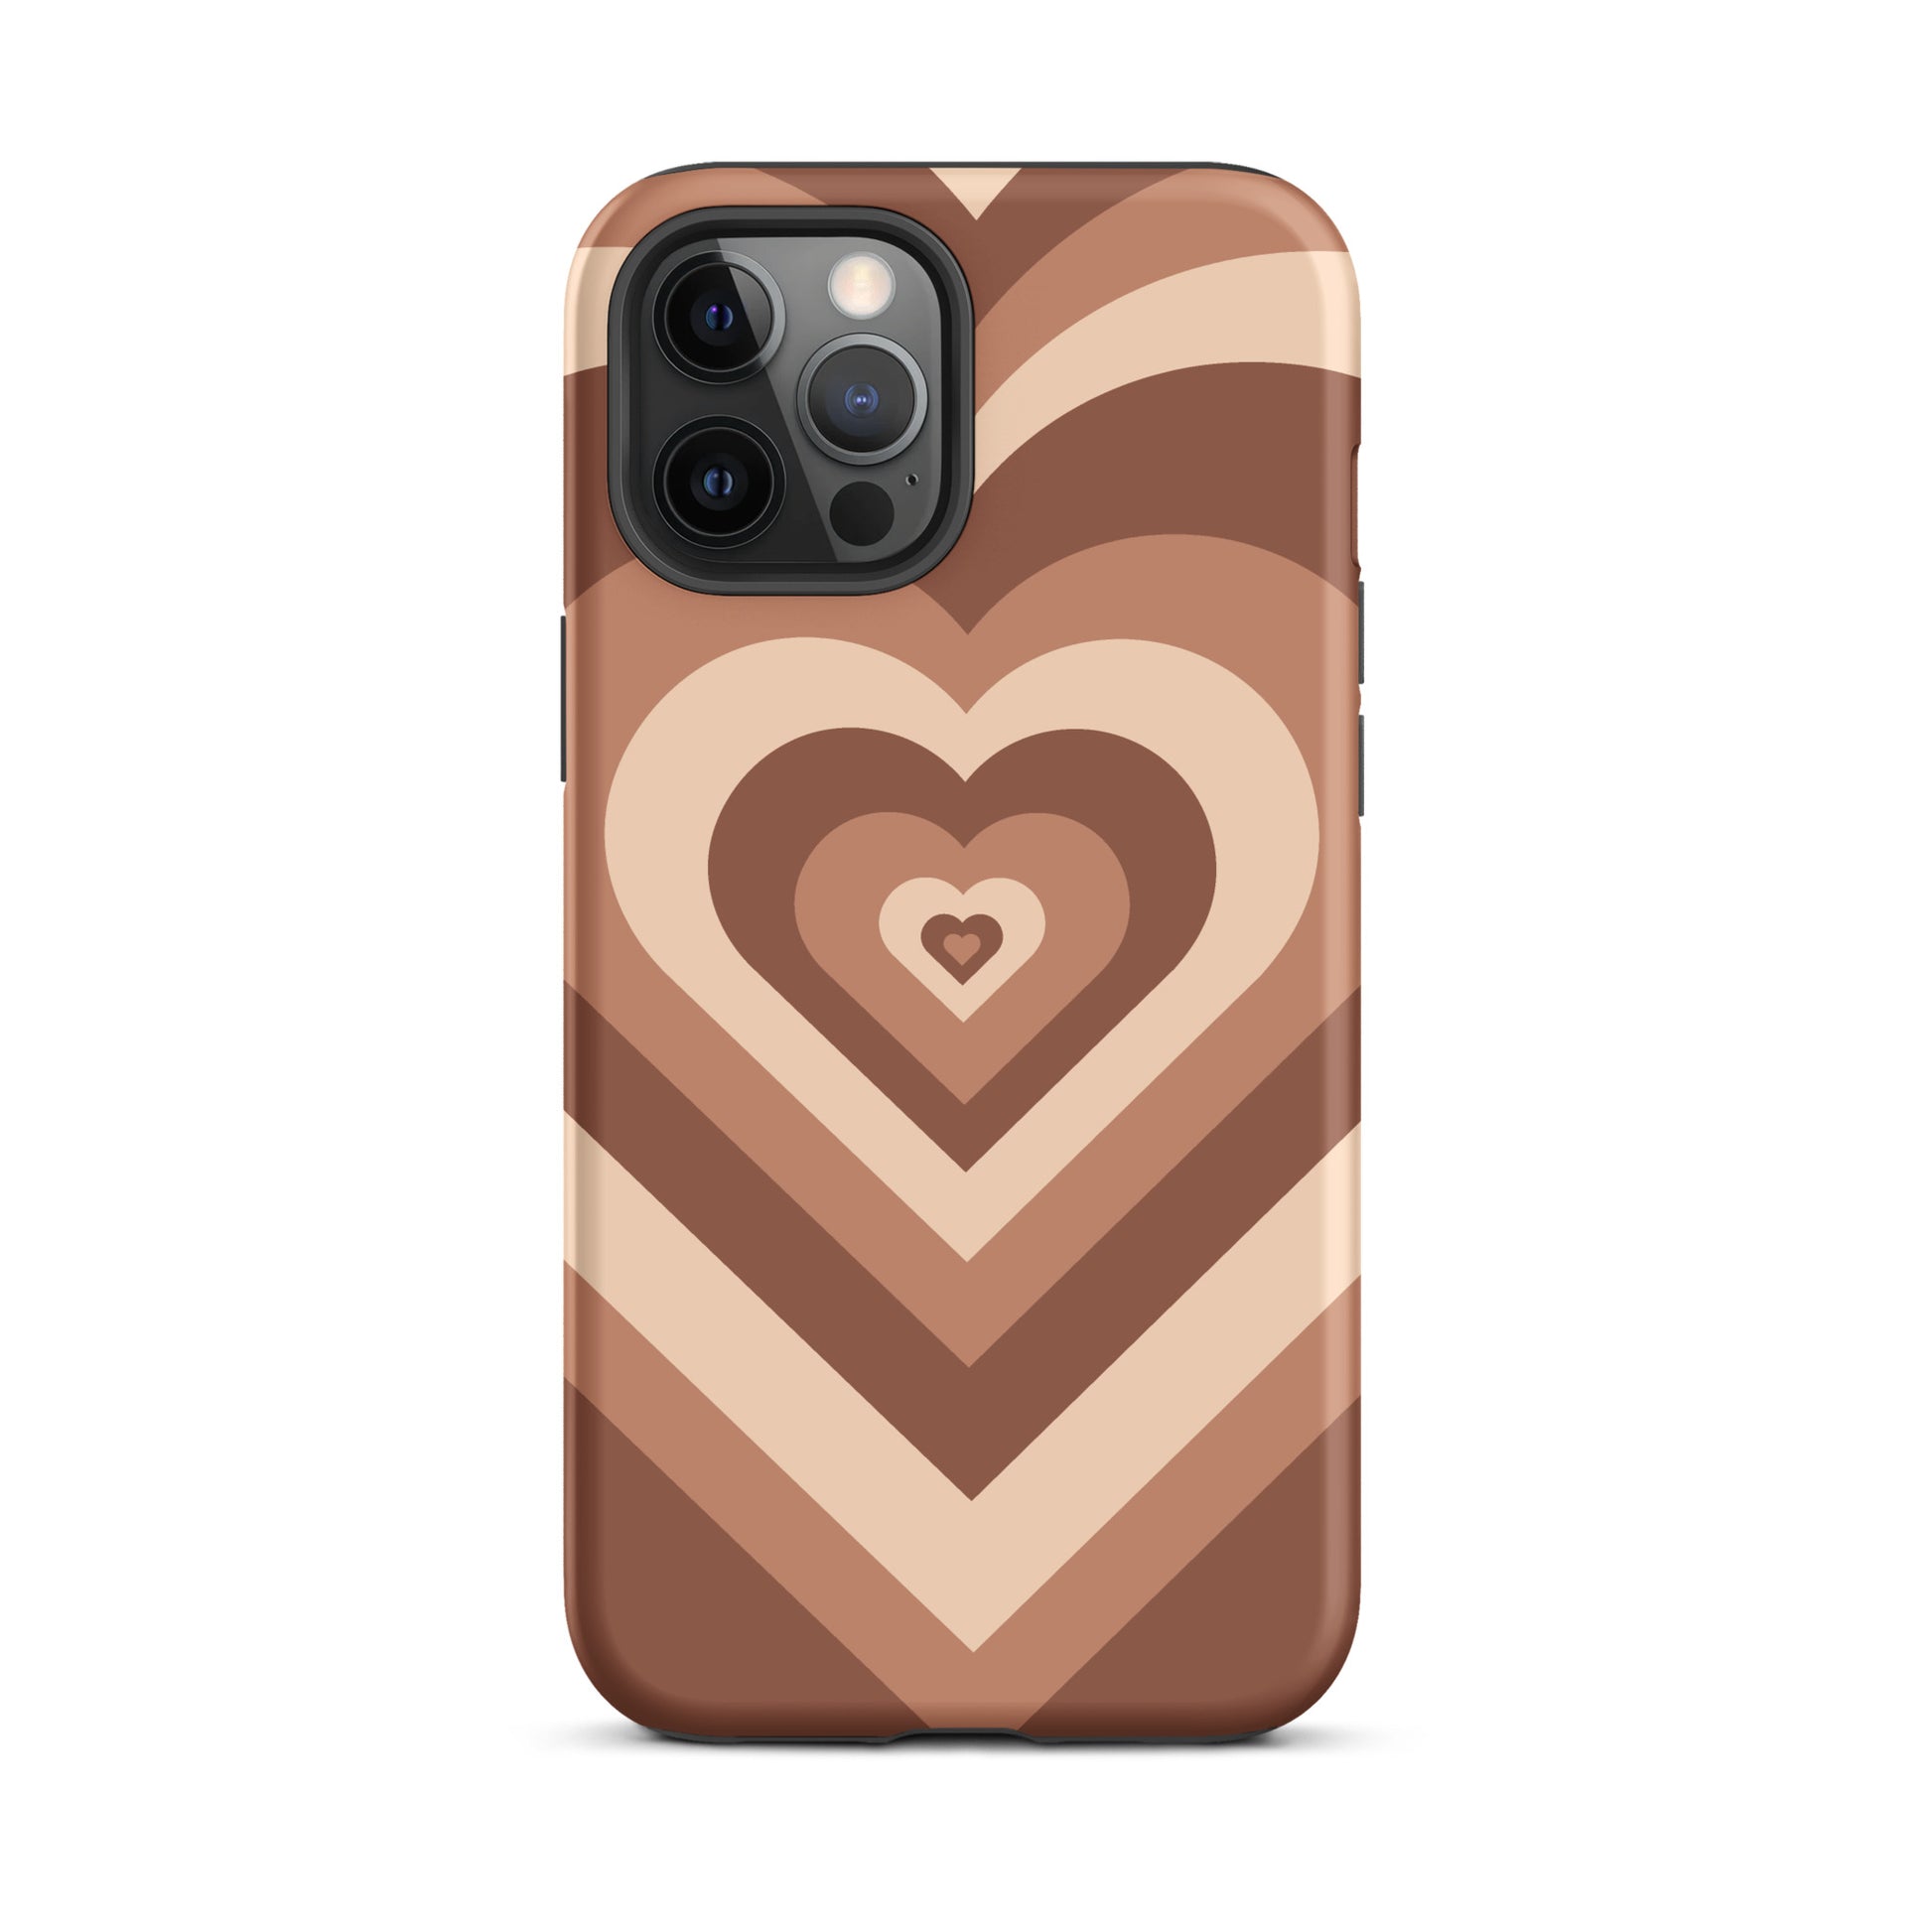 Choco Hearts iPhone Case iPhone 12 Pro Max Matte